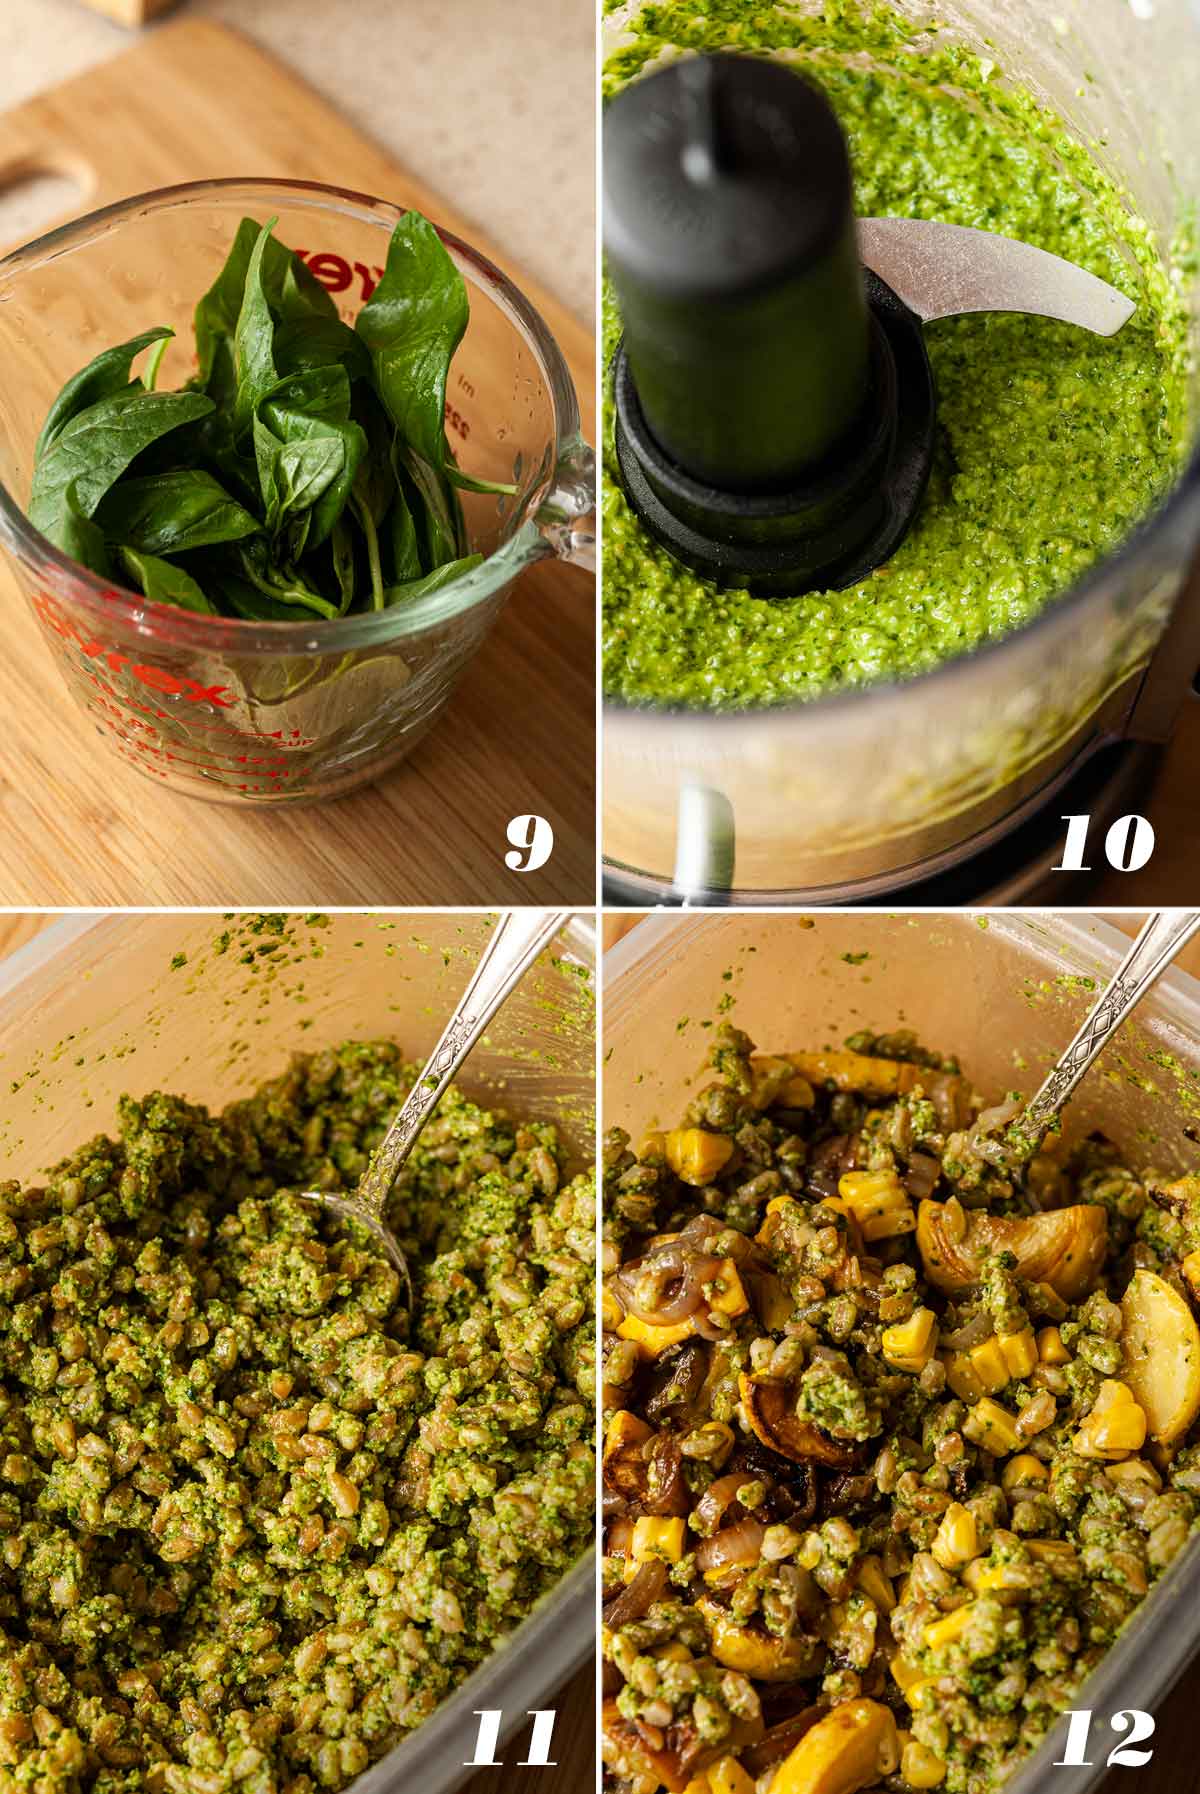 A collage of 4 numbered images showing how to make pesto and mix with farro and vegetables.